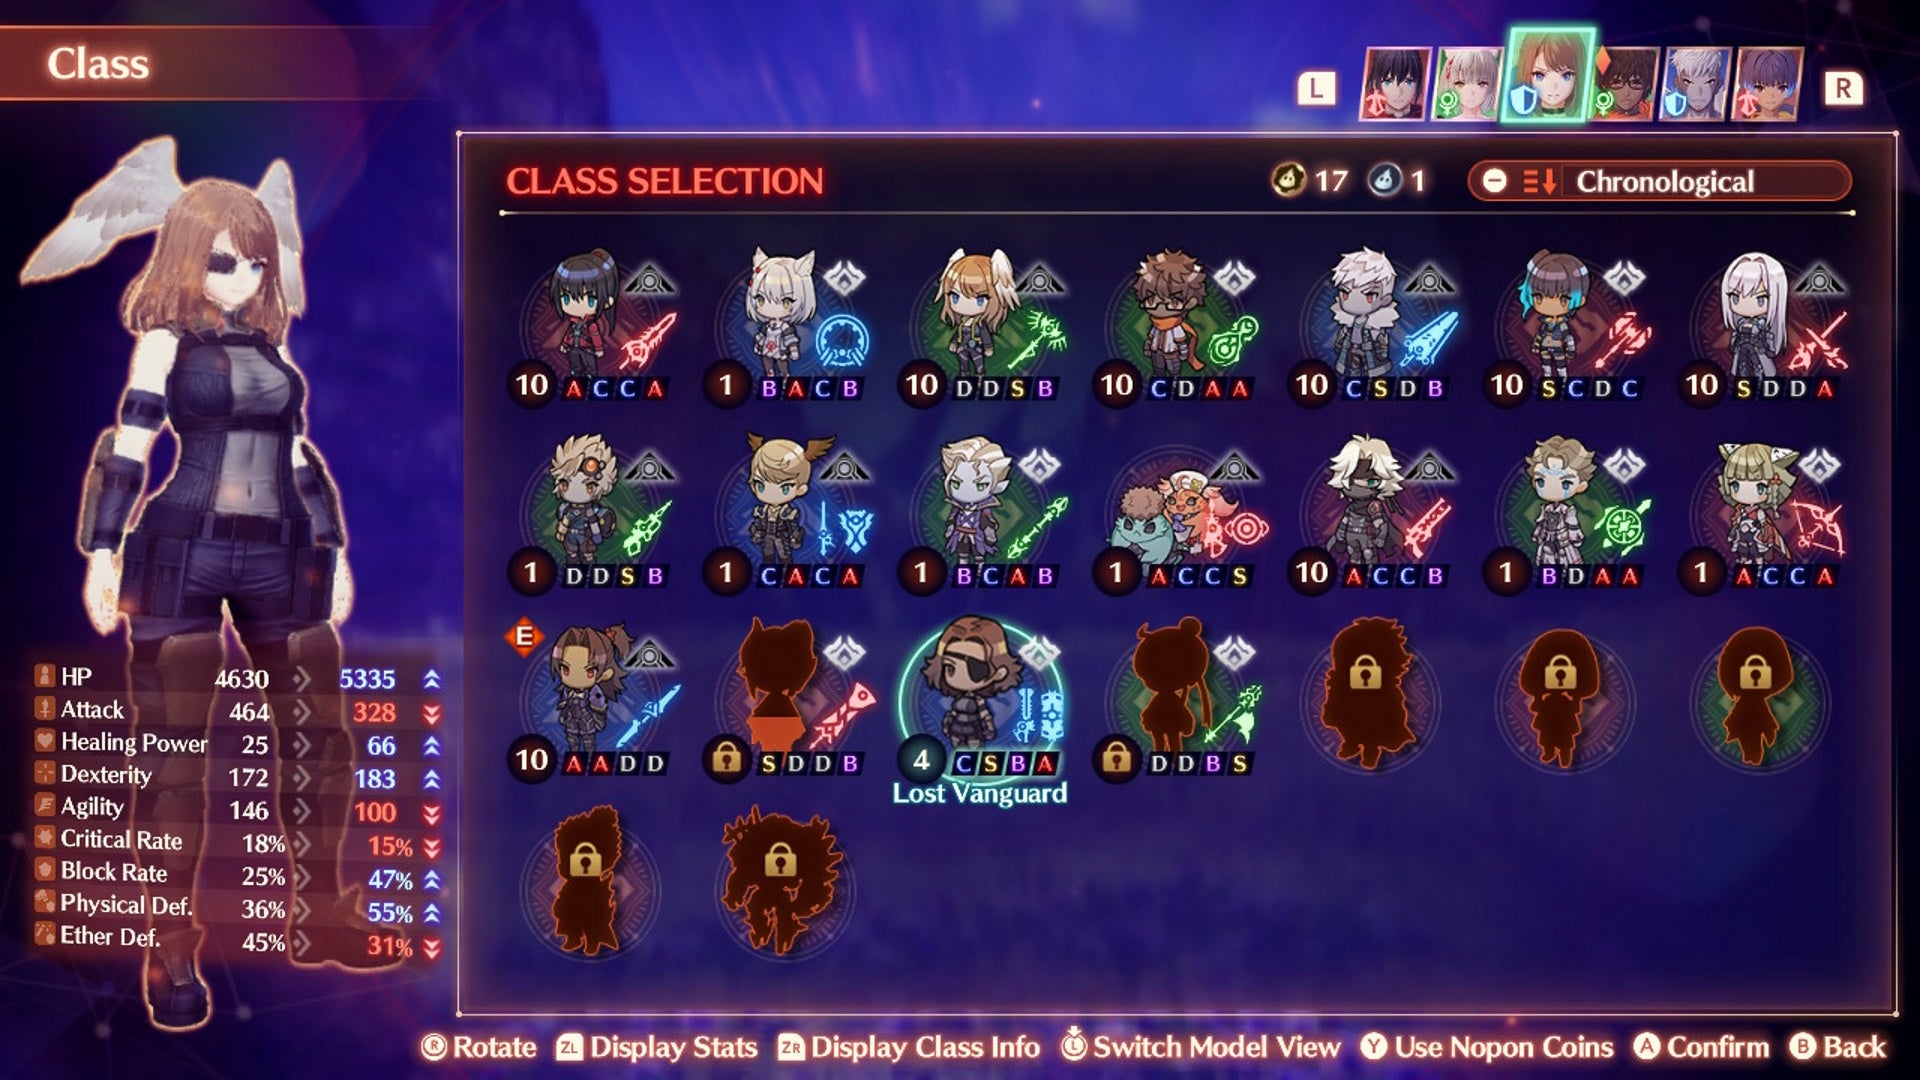 Xenoblade Chronicles 3 arts: The Lost Vanguard class on the class selection screen